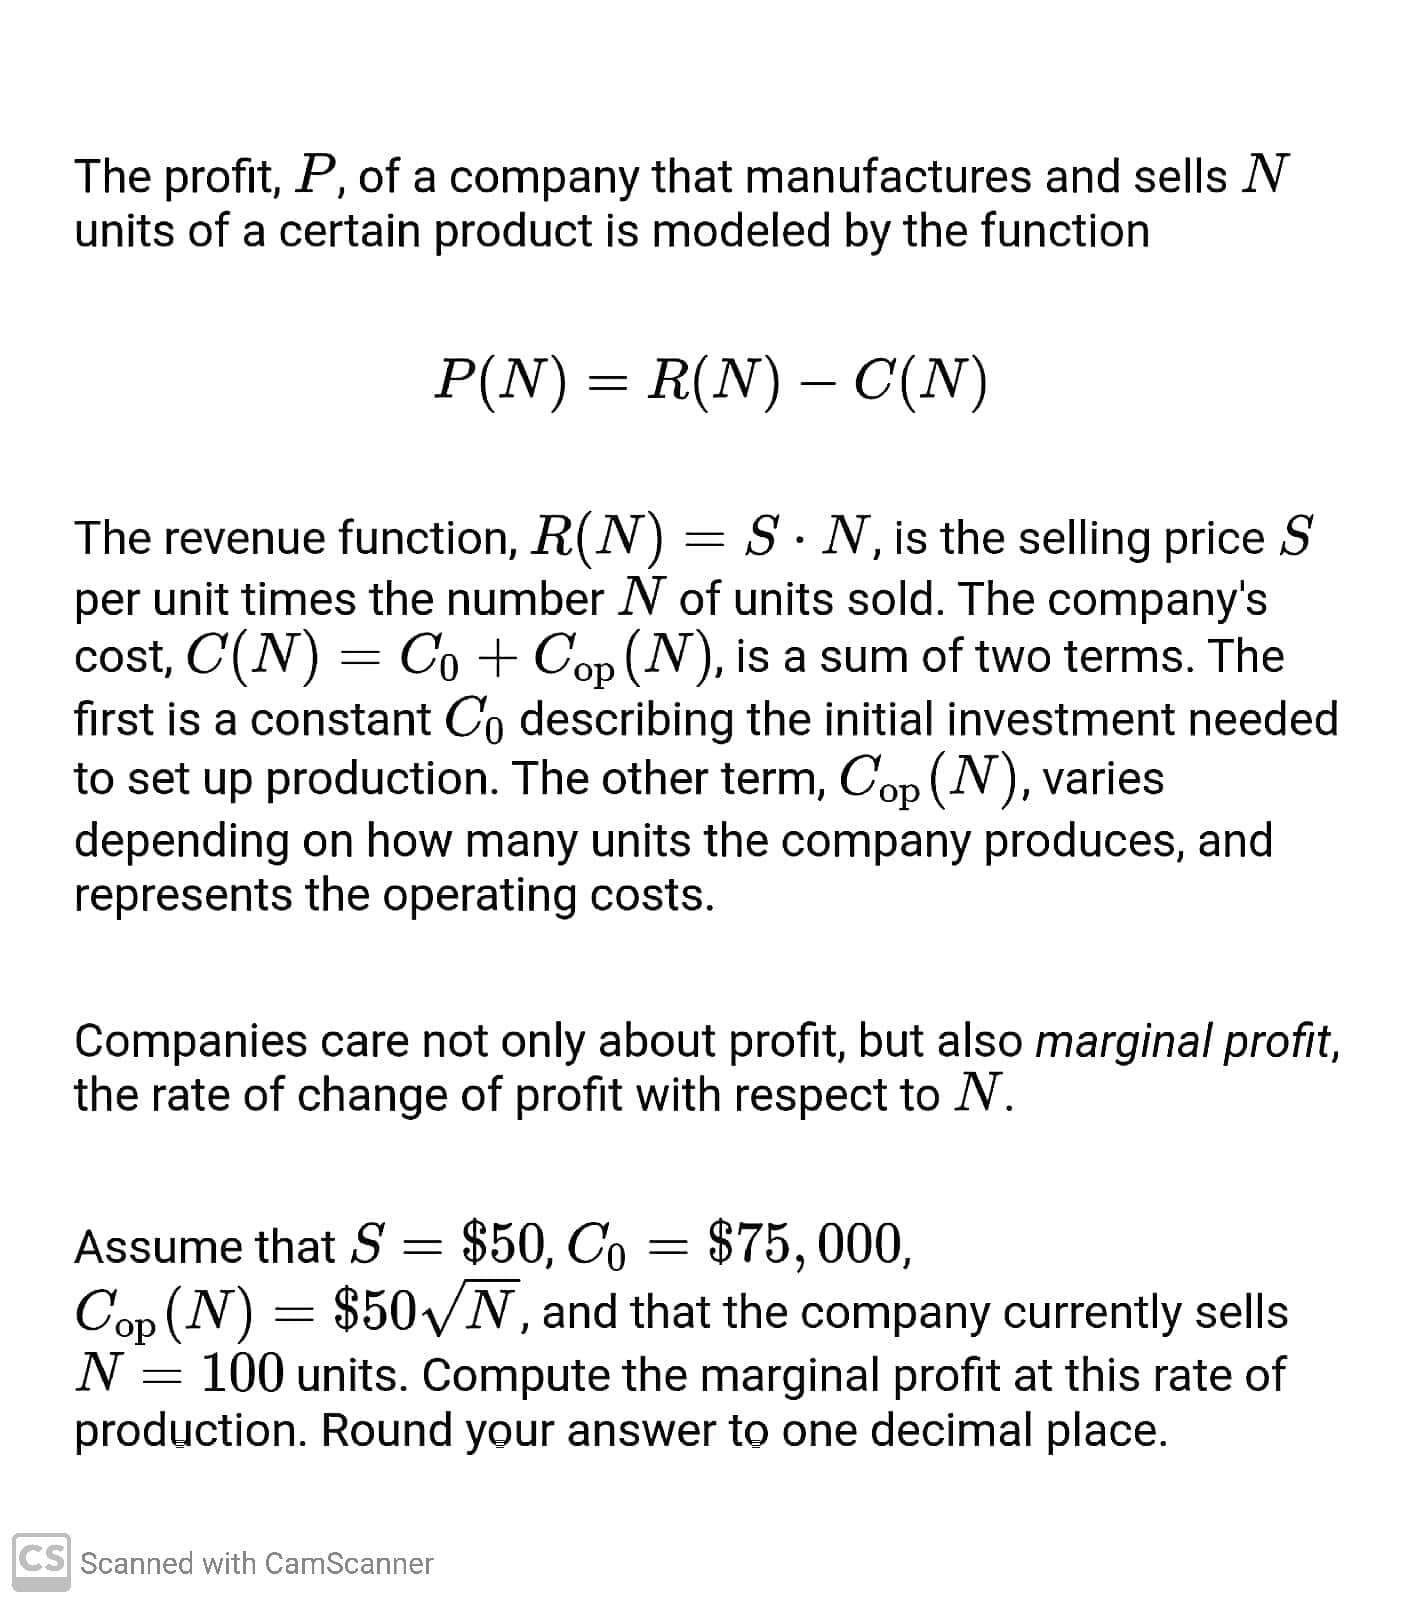 The profit, P, of a company that manufactures and sells N
units of a certain product is modeled by the function
P(N) = R(N) – C(N)
|
The revenue function, R(N) = S · N, is the selling price S
per unit times the number N of units sold. The company's
cost, C(N) = Co + Cop (N), is a sum of two terms. The
do,
first is a constant Co describing the initial investment needed
